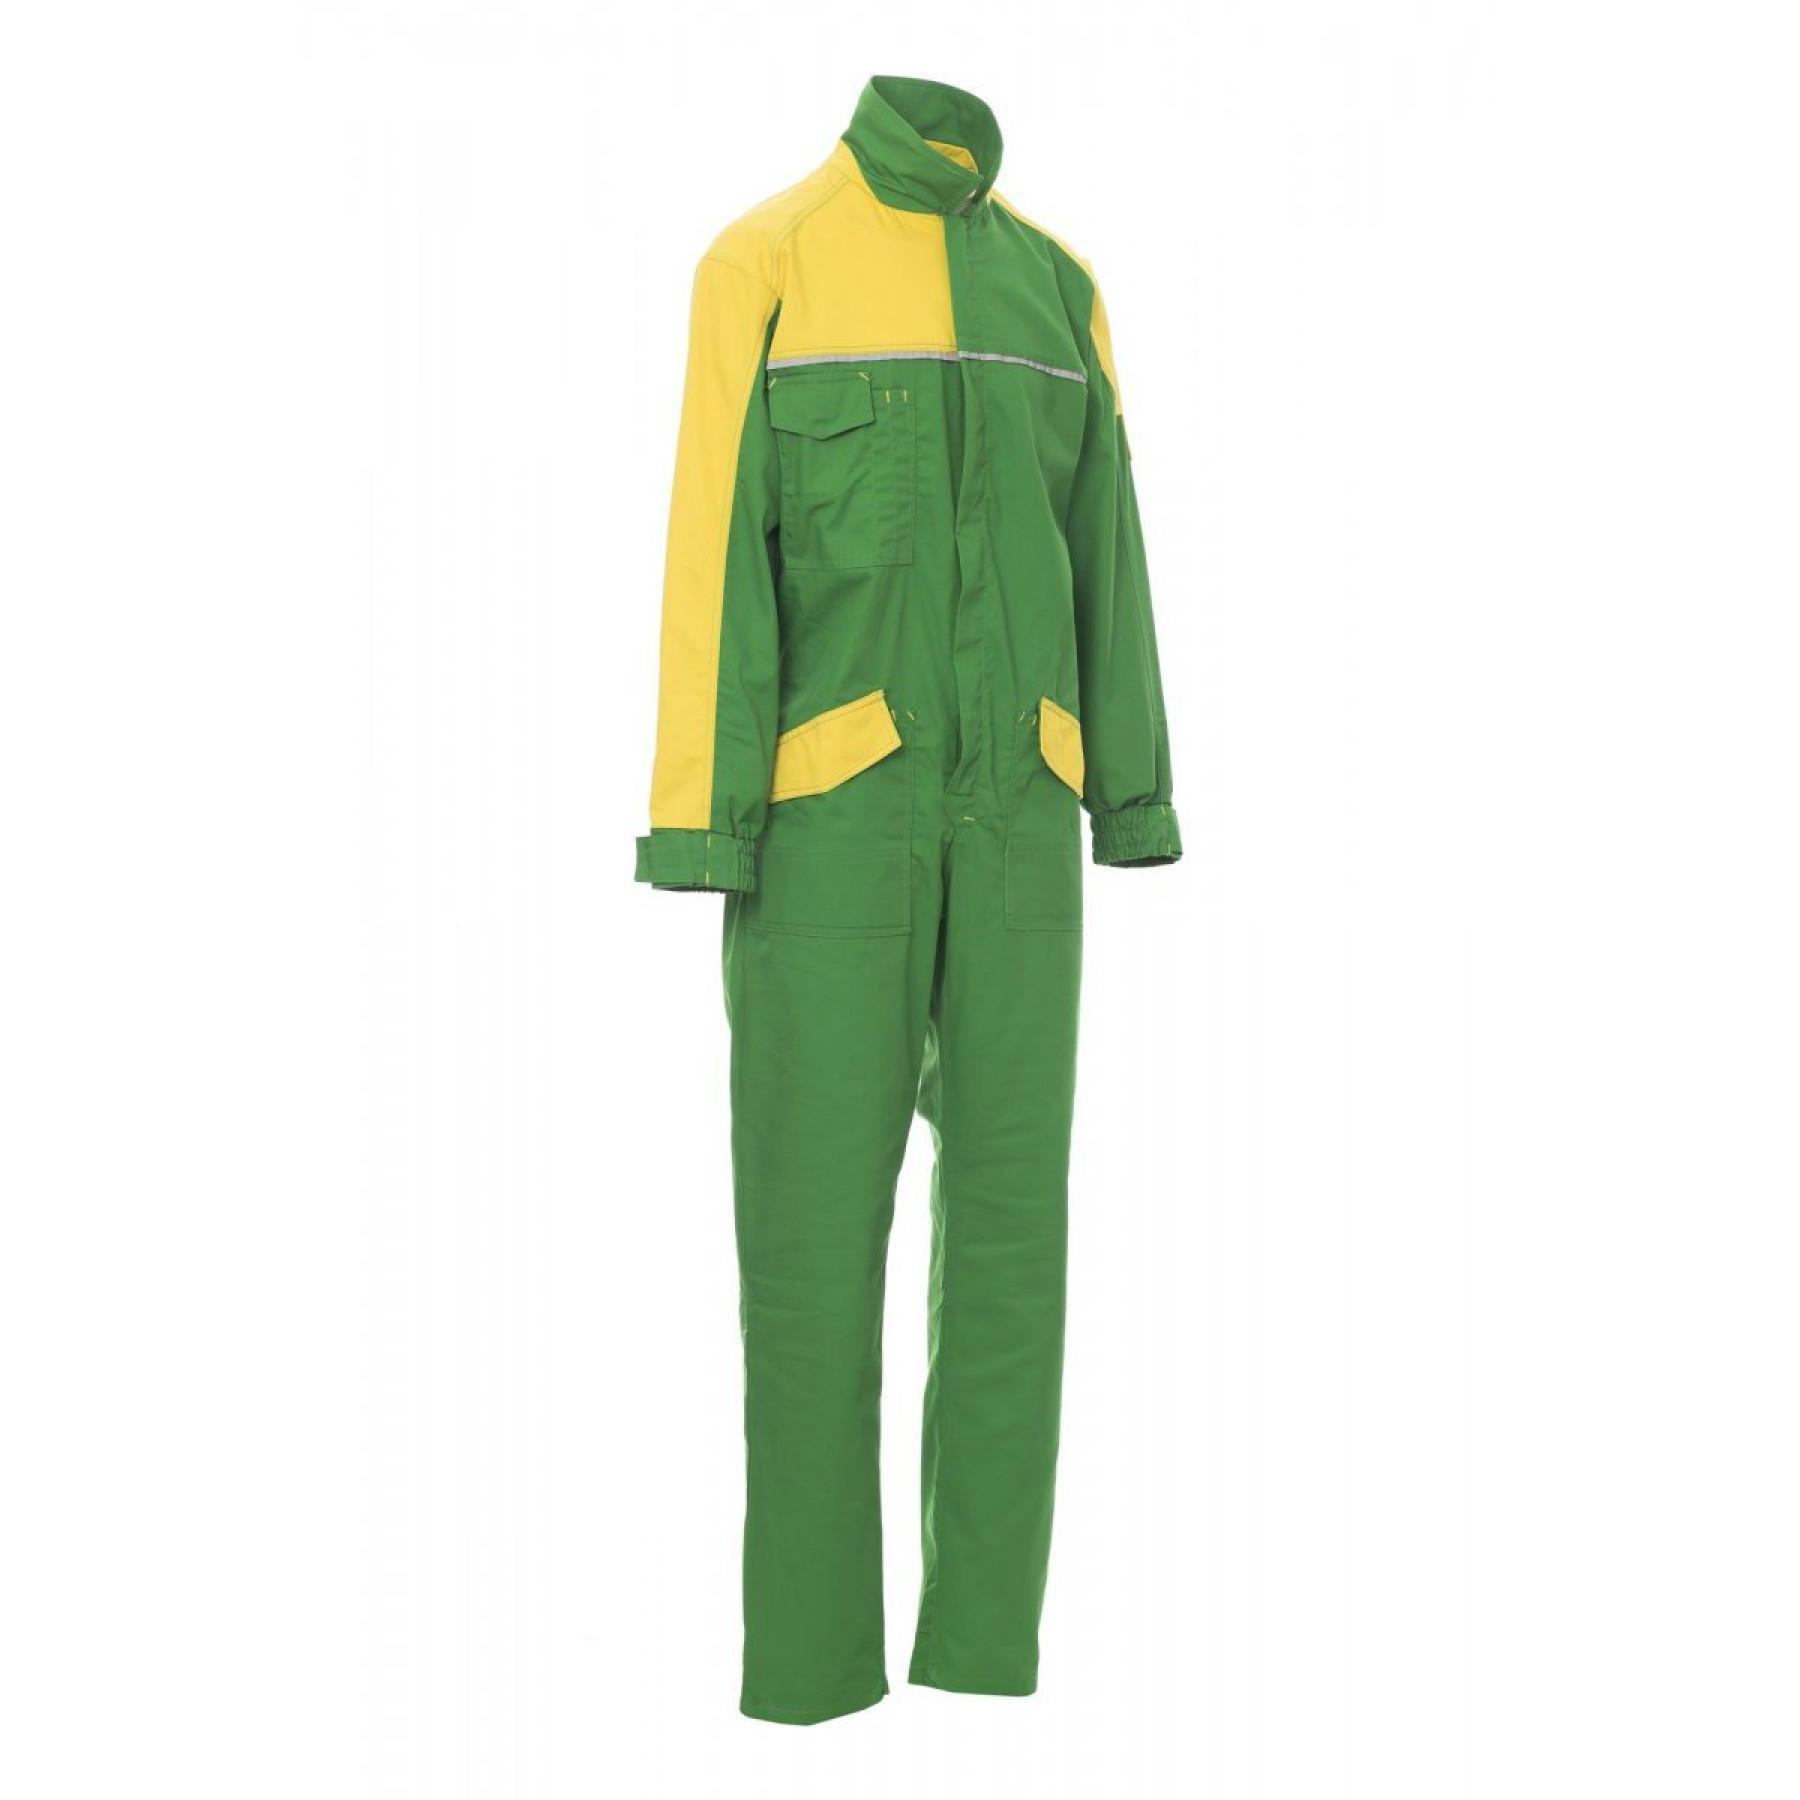 Payper Promotech Coverall